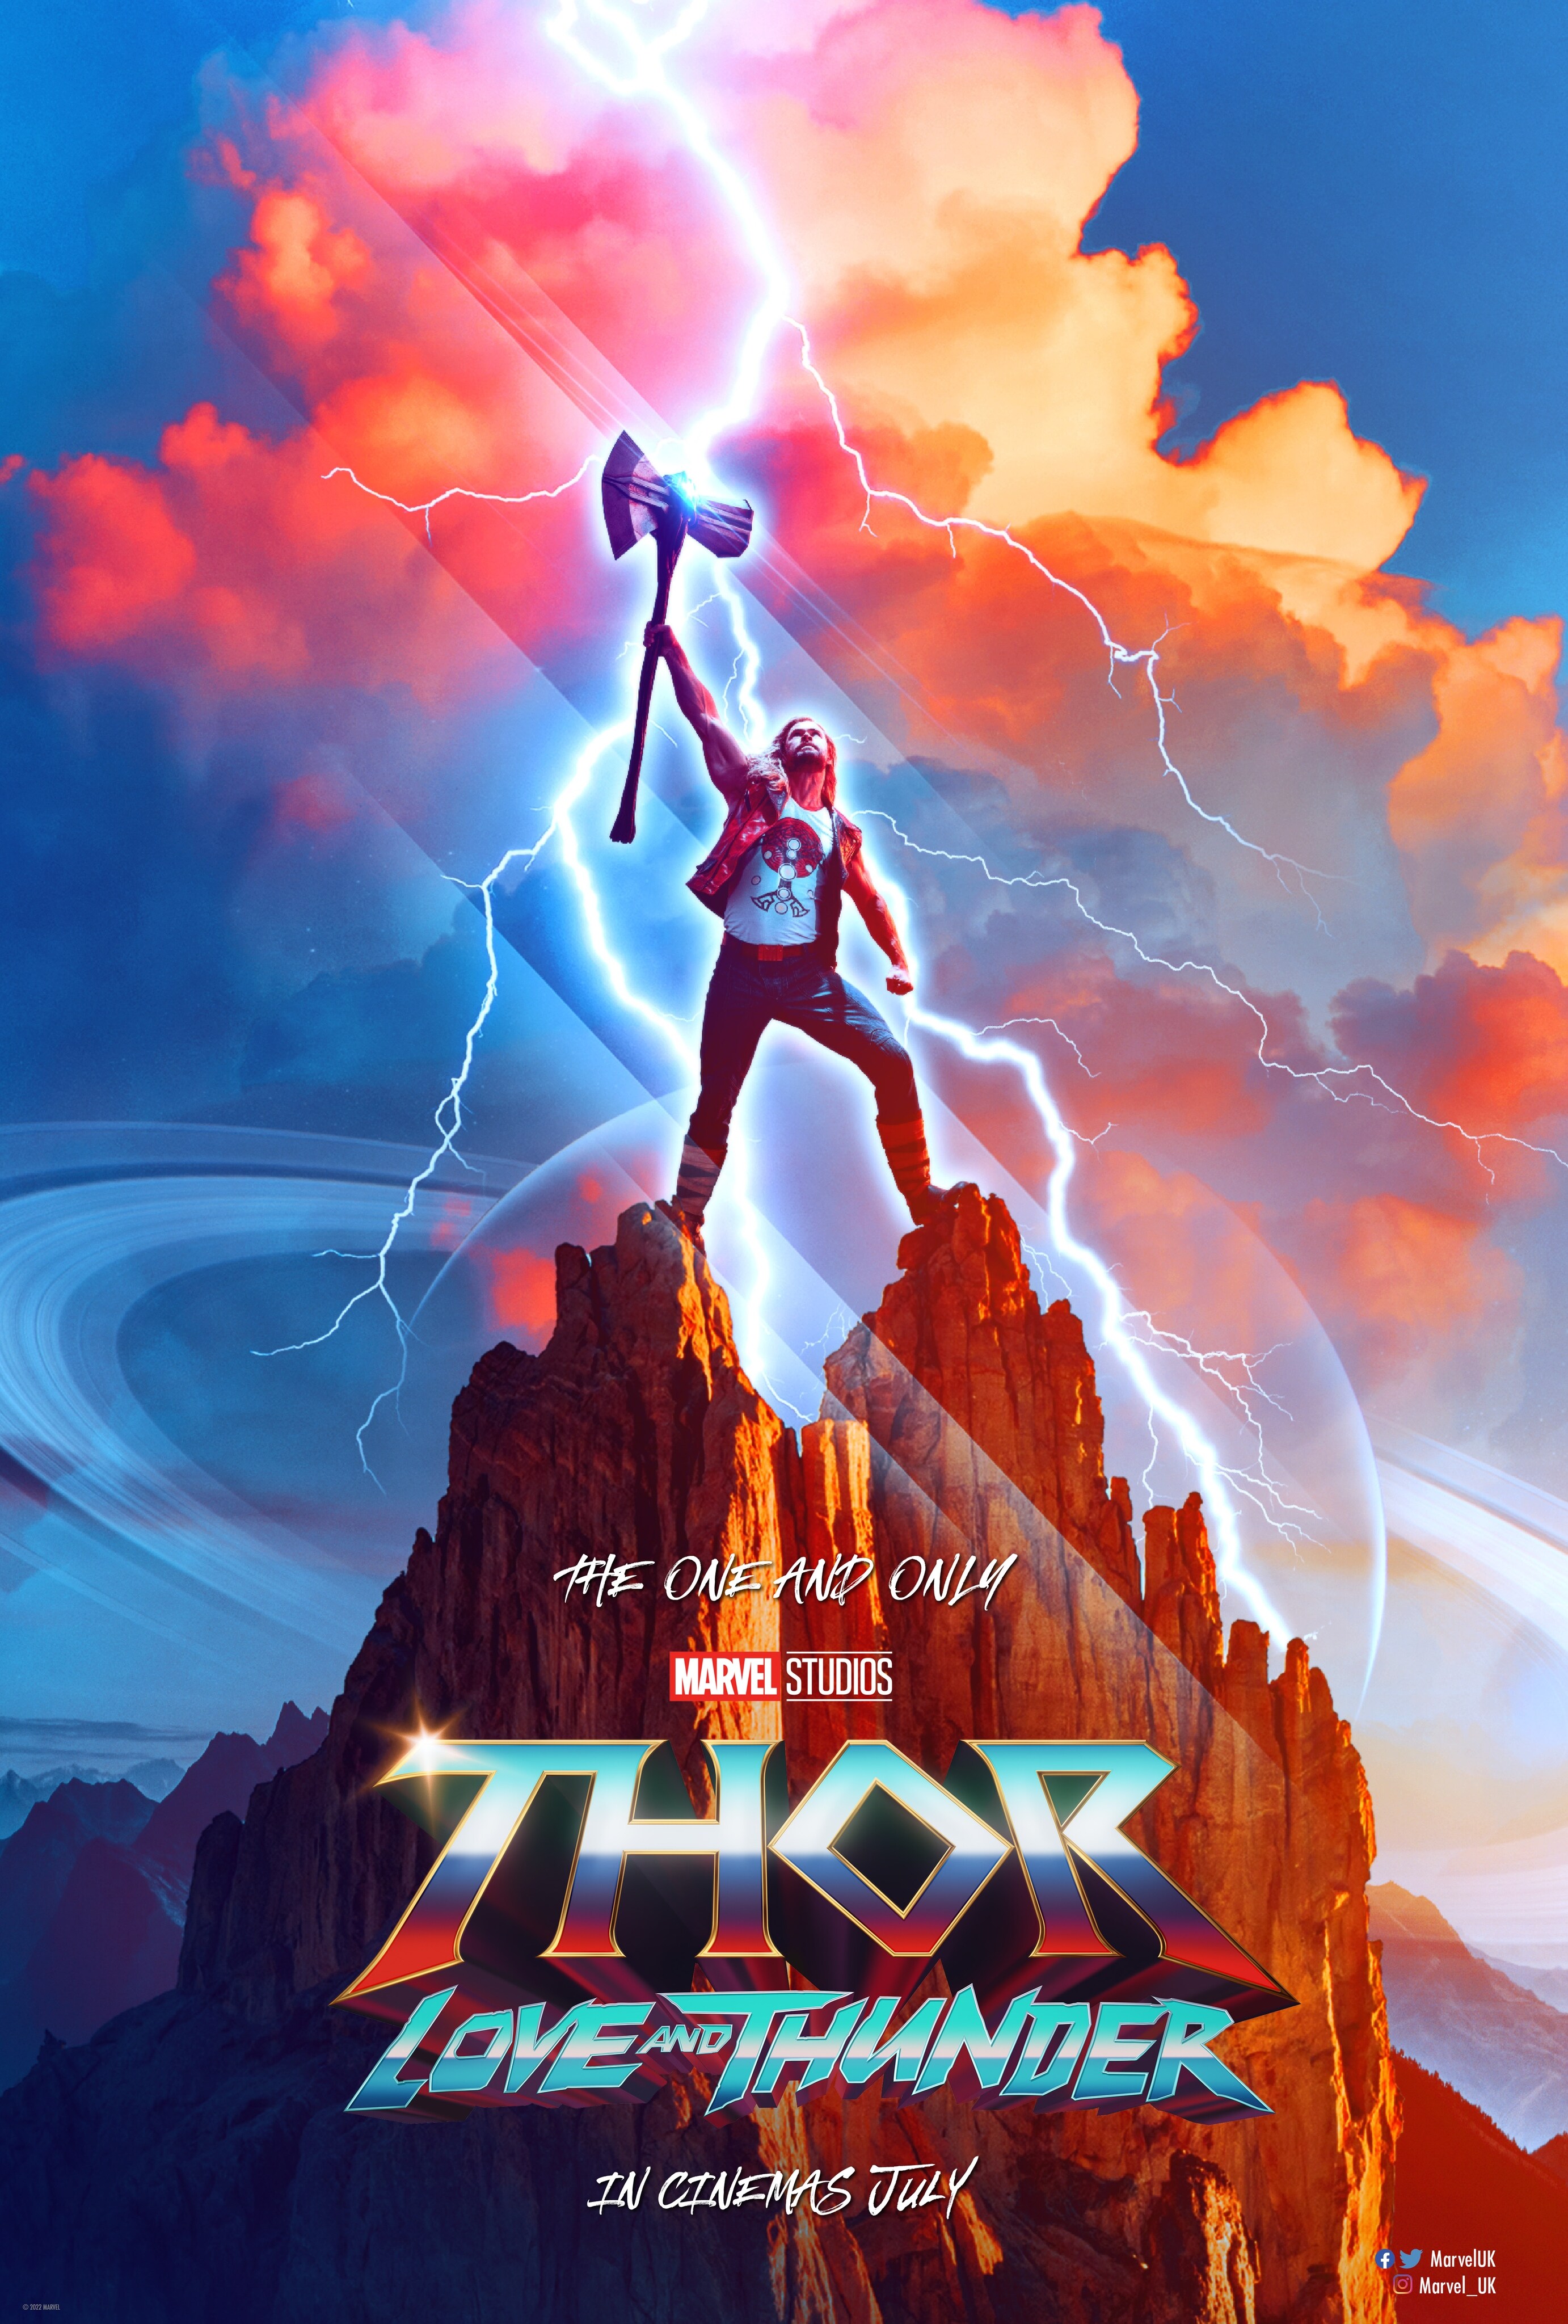 The New 'Thor: Love and Thunder' Trailer Unveils Gorr the God Butcher